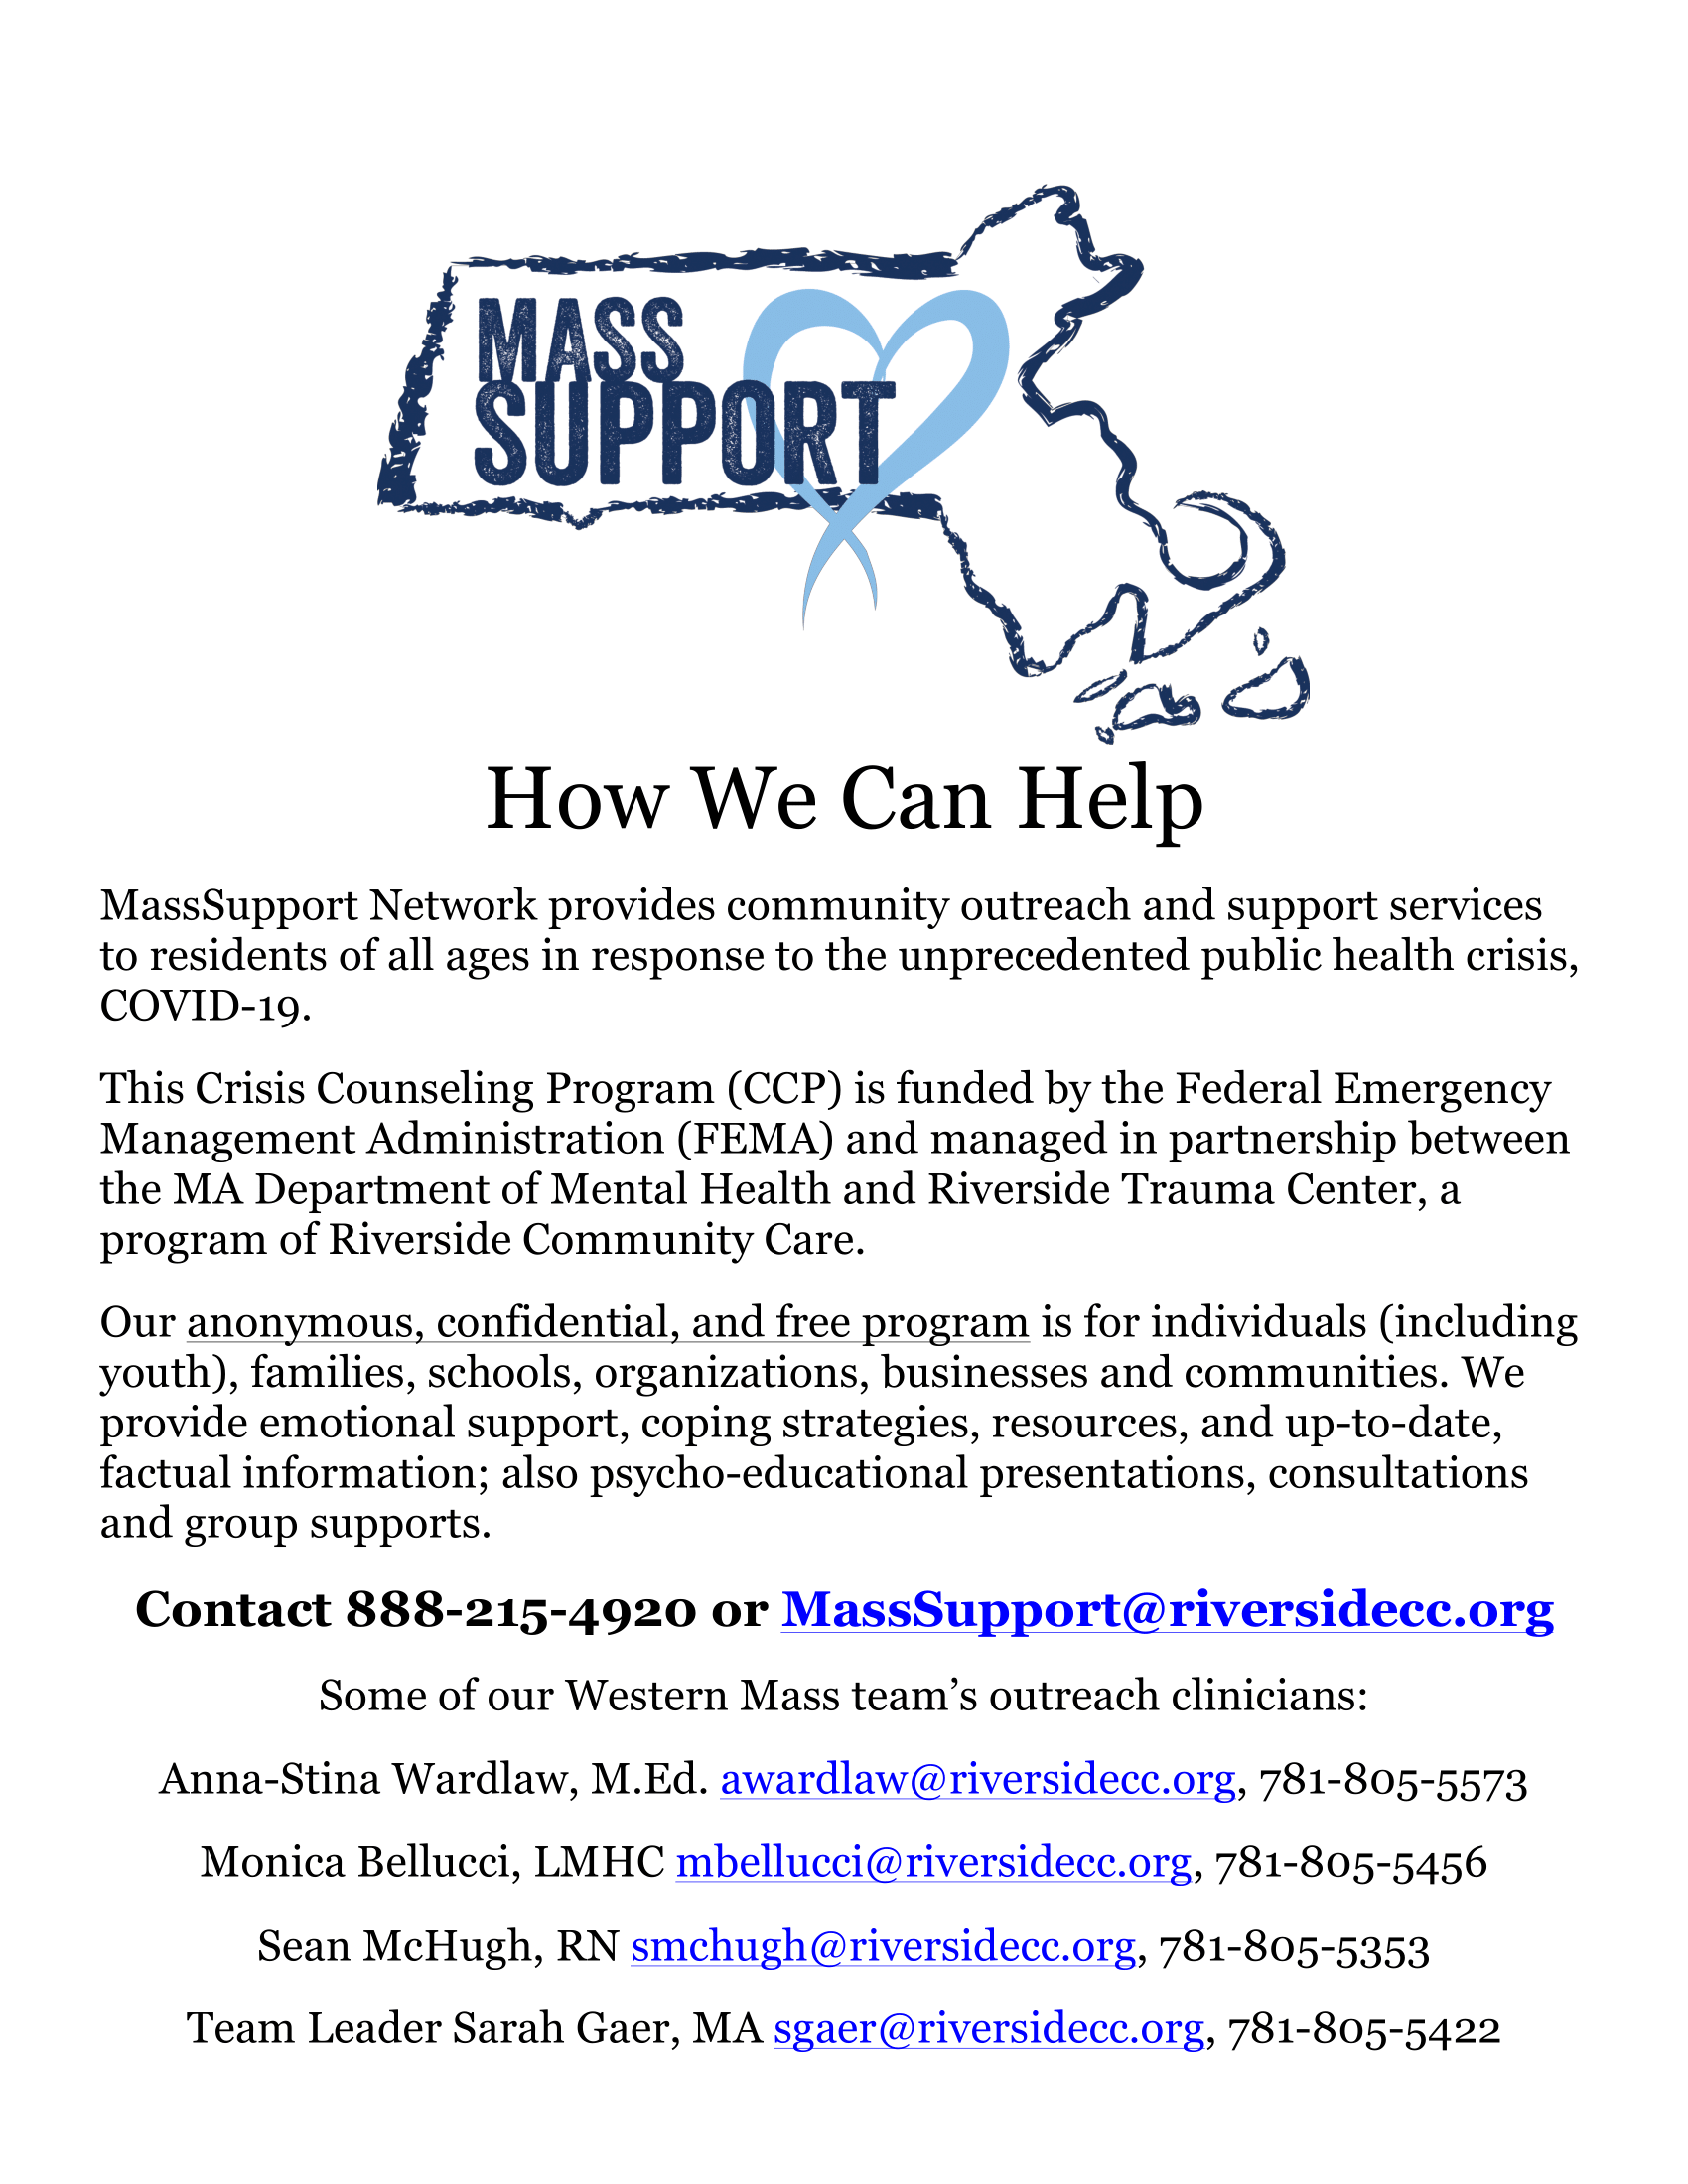 MassSupport Network 1 page PDF 1 How we Can Help 1